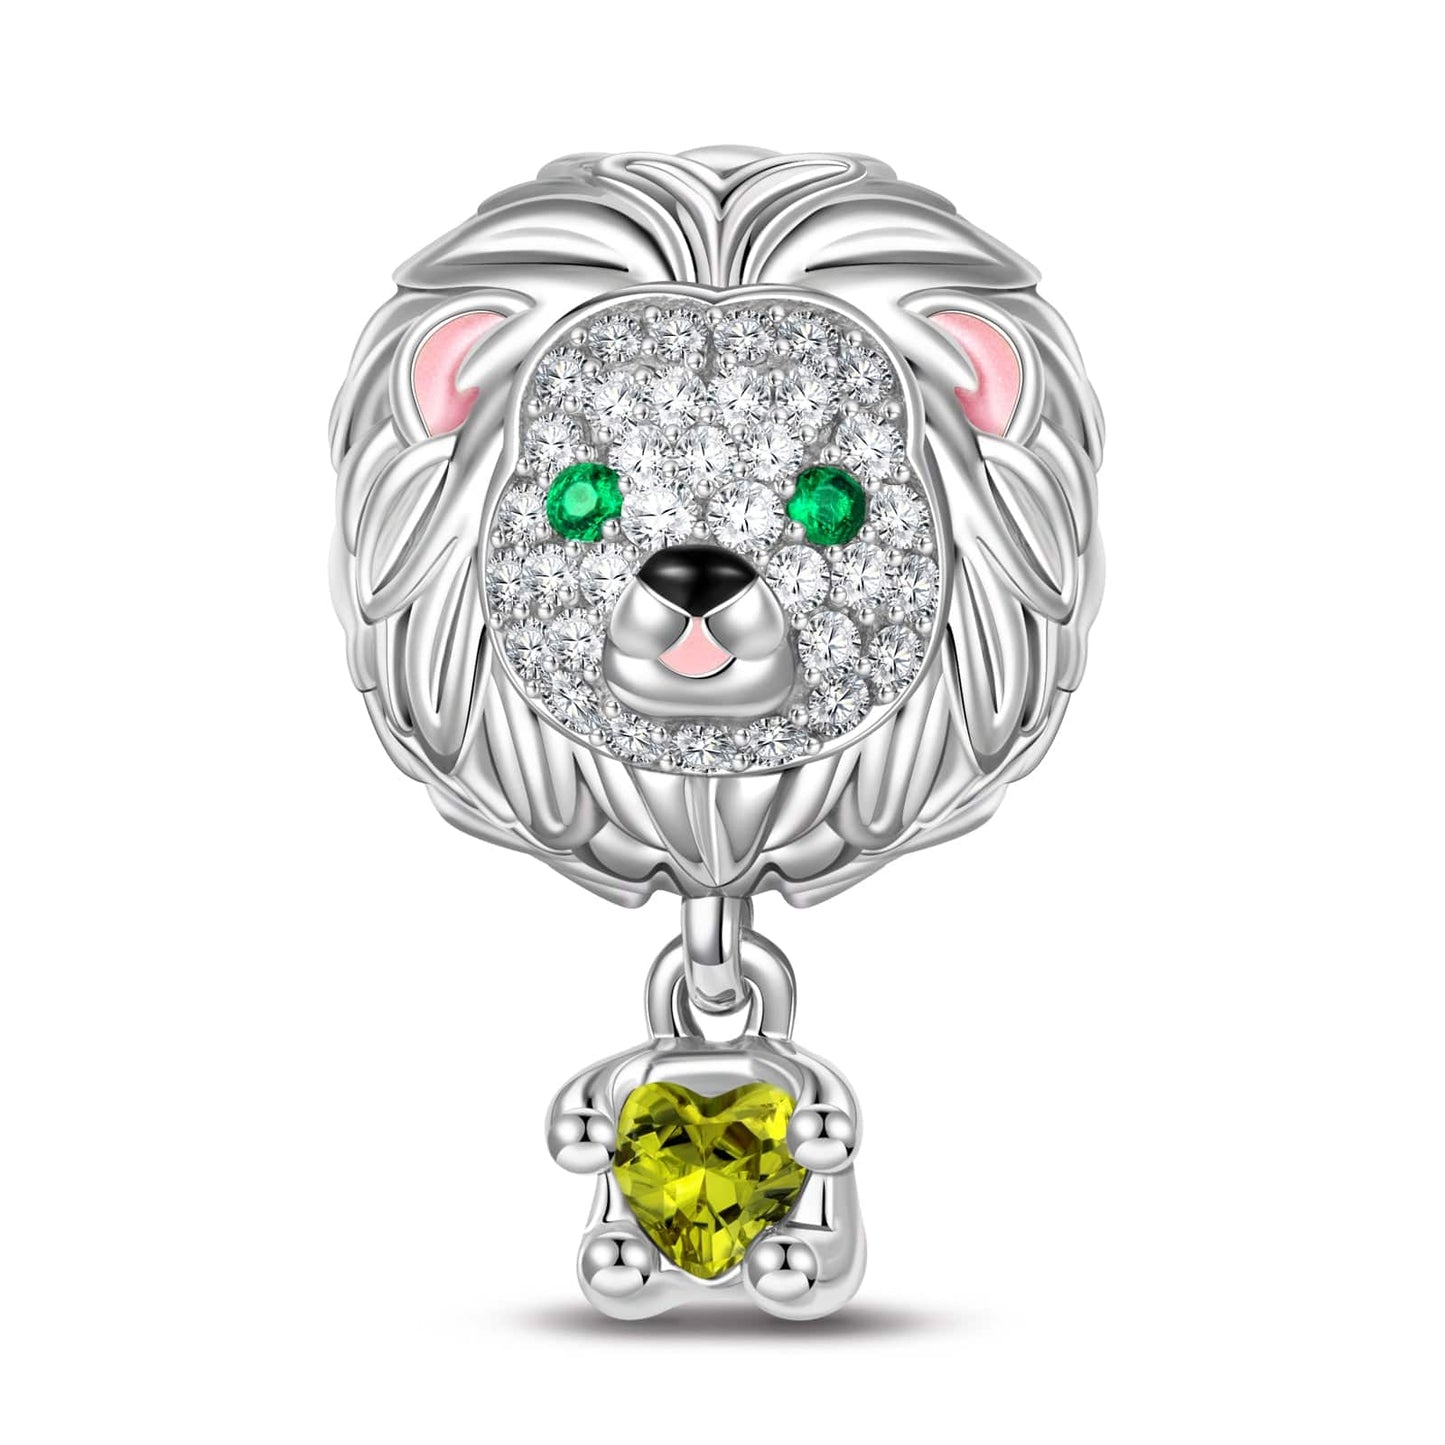 Love Hug Lion Tarnish-resistant Silver Animal Charms With Enamel In White Gold Plated - Heartful Hugs Collection